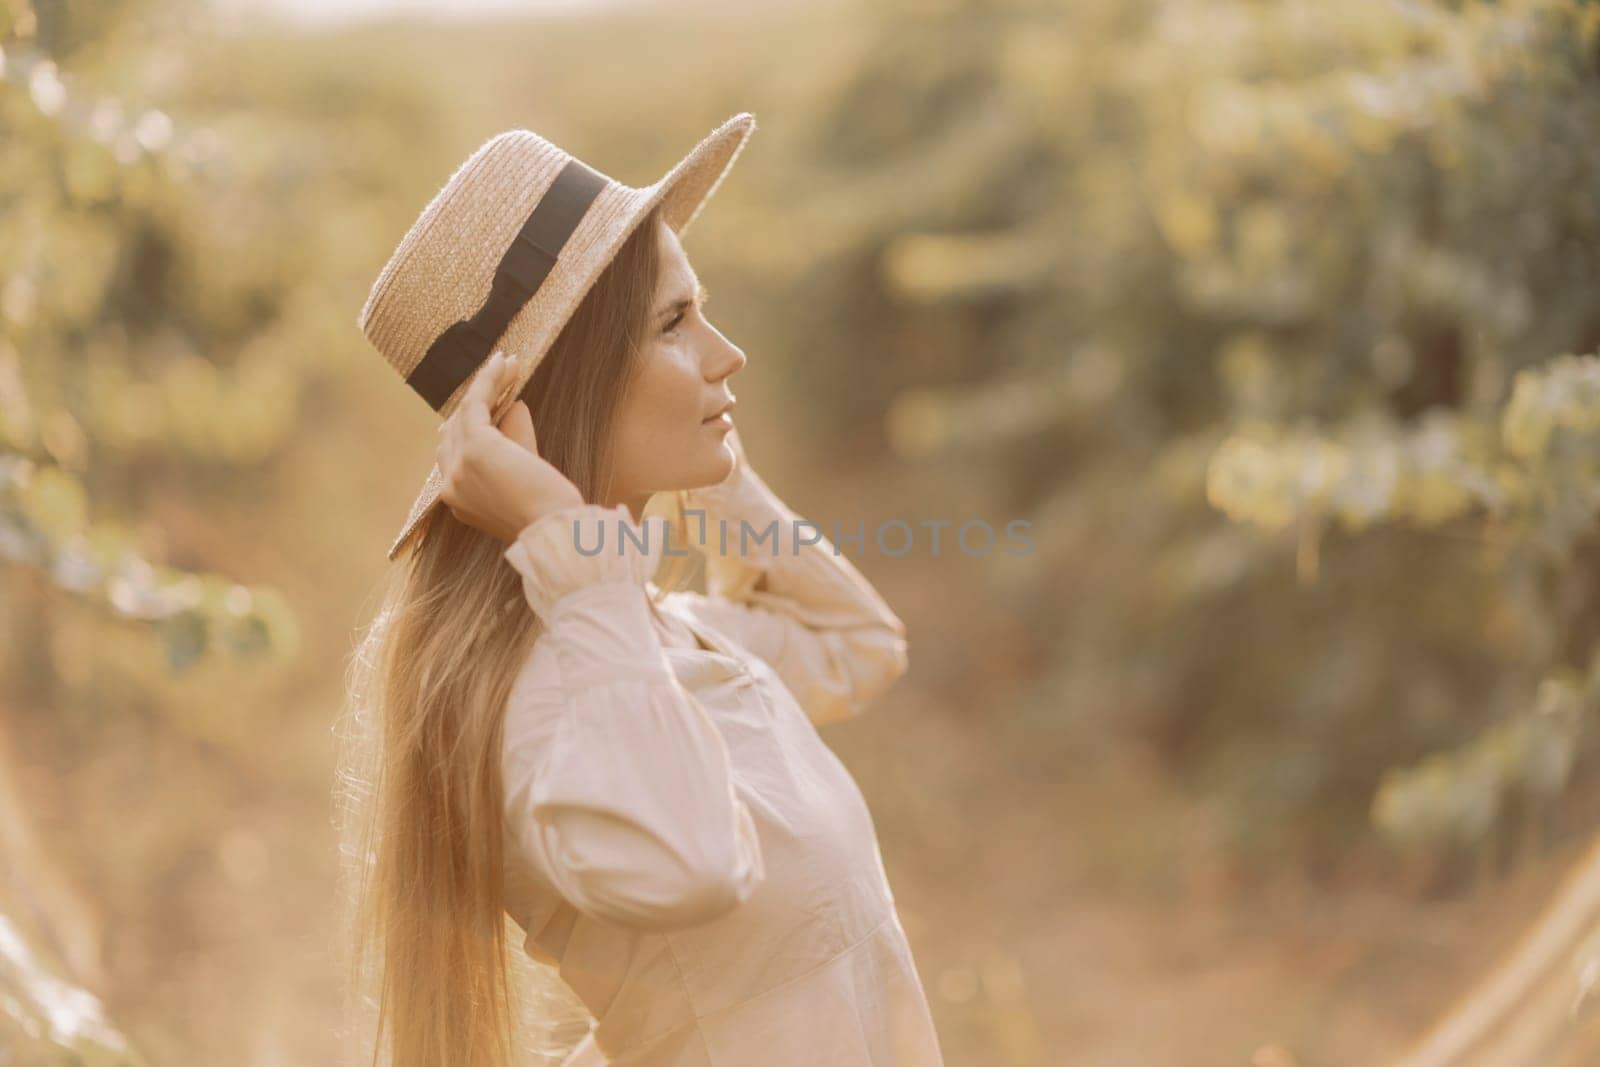 Woman with straw hat stands in front of vineyard. She is wearing a light dress and posing for a photo. Travel concept to different countries by Matiunina